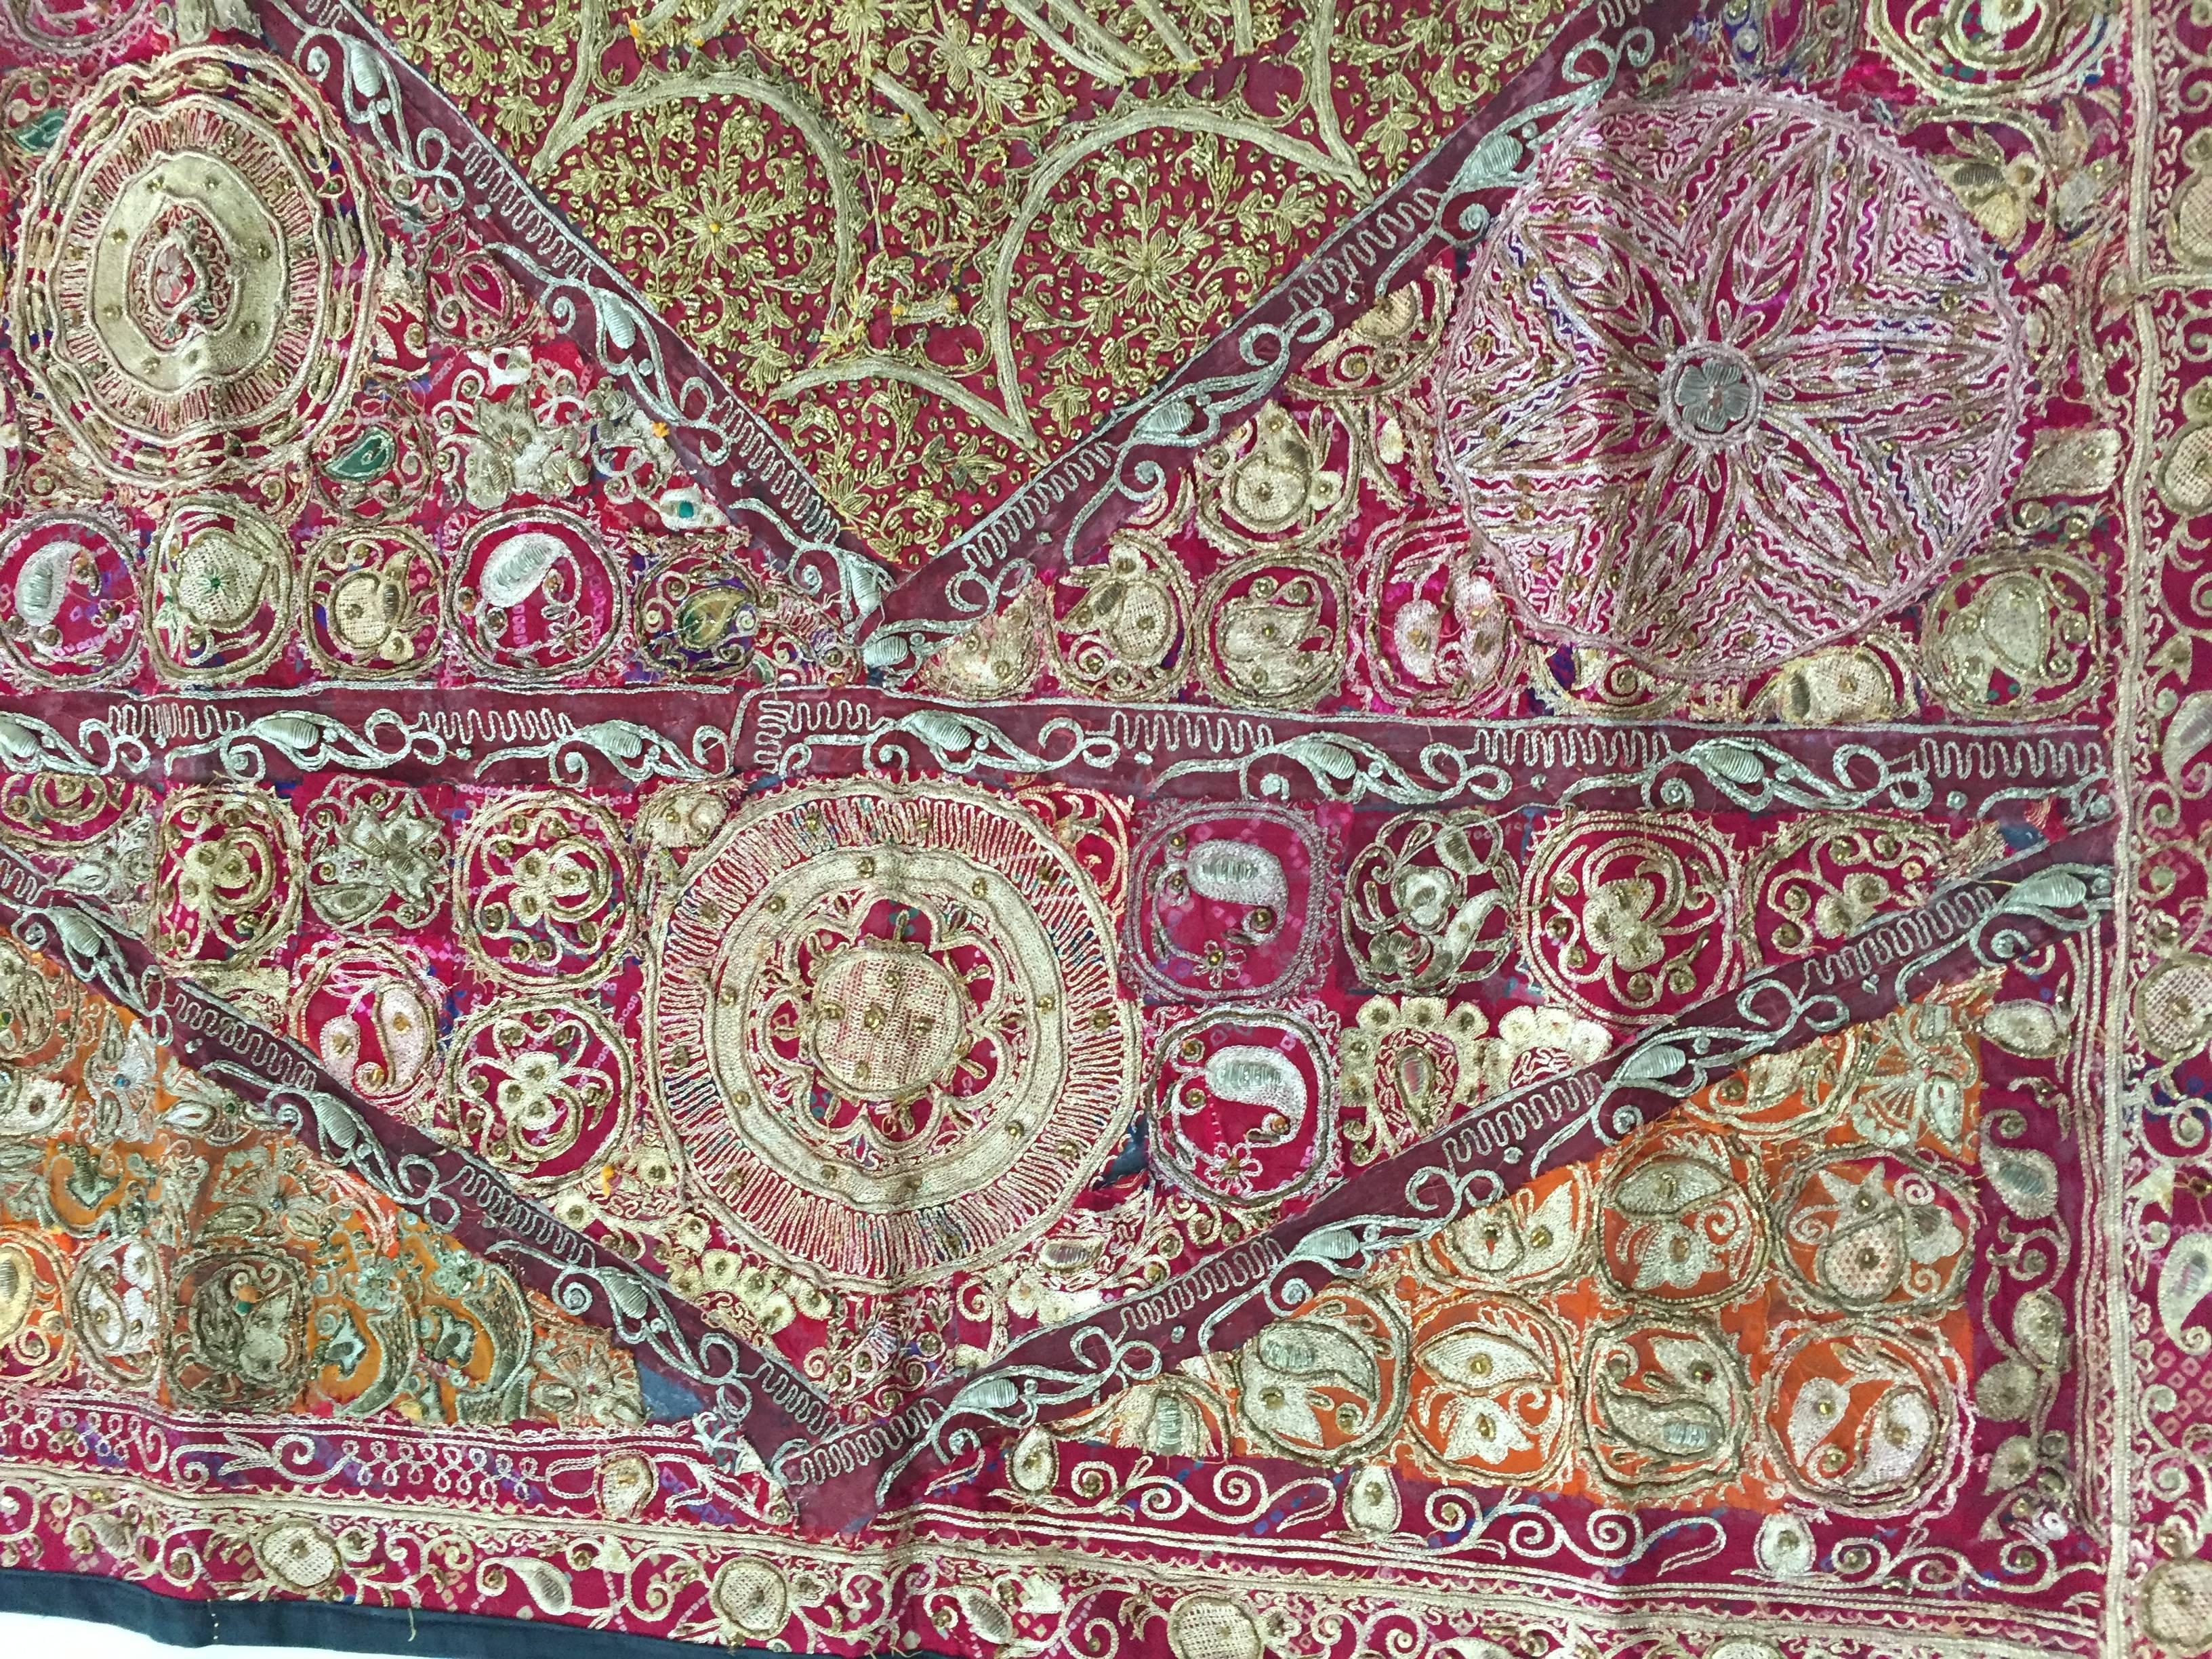 Hand embroidered and quilted textile from North India.
Mughal silk and metal threaded tapestry.
Backed with black linen.
Fanciful Asian folk designs this distinctive quilt work is a true sense of artistic freedom.
The majority of the border is